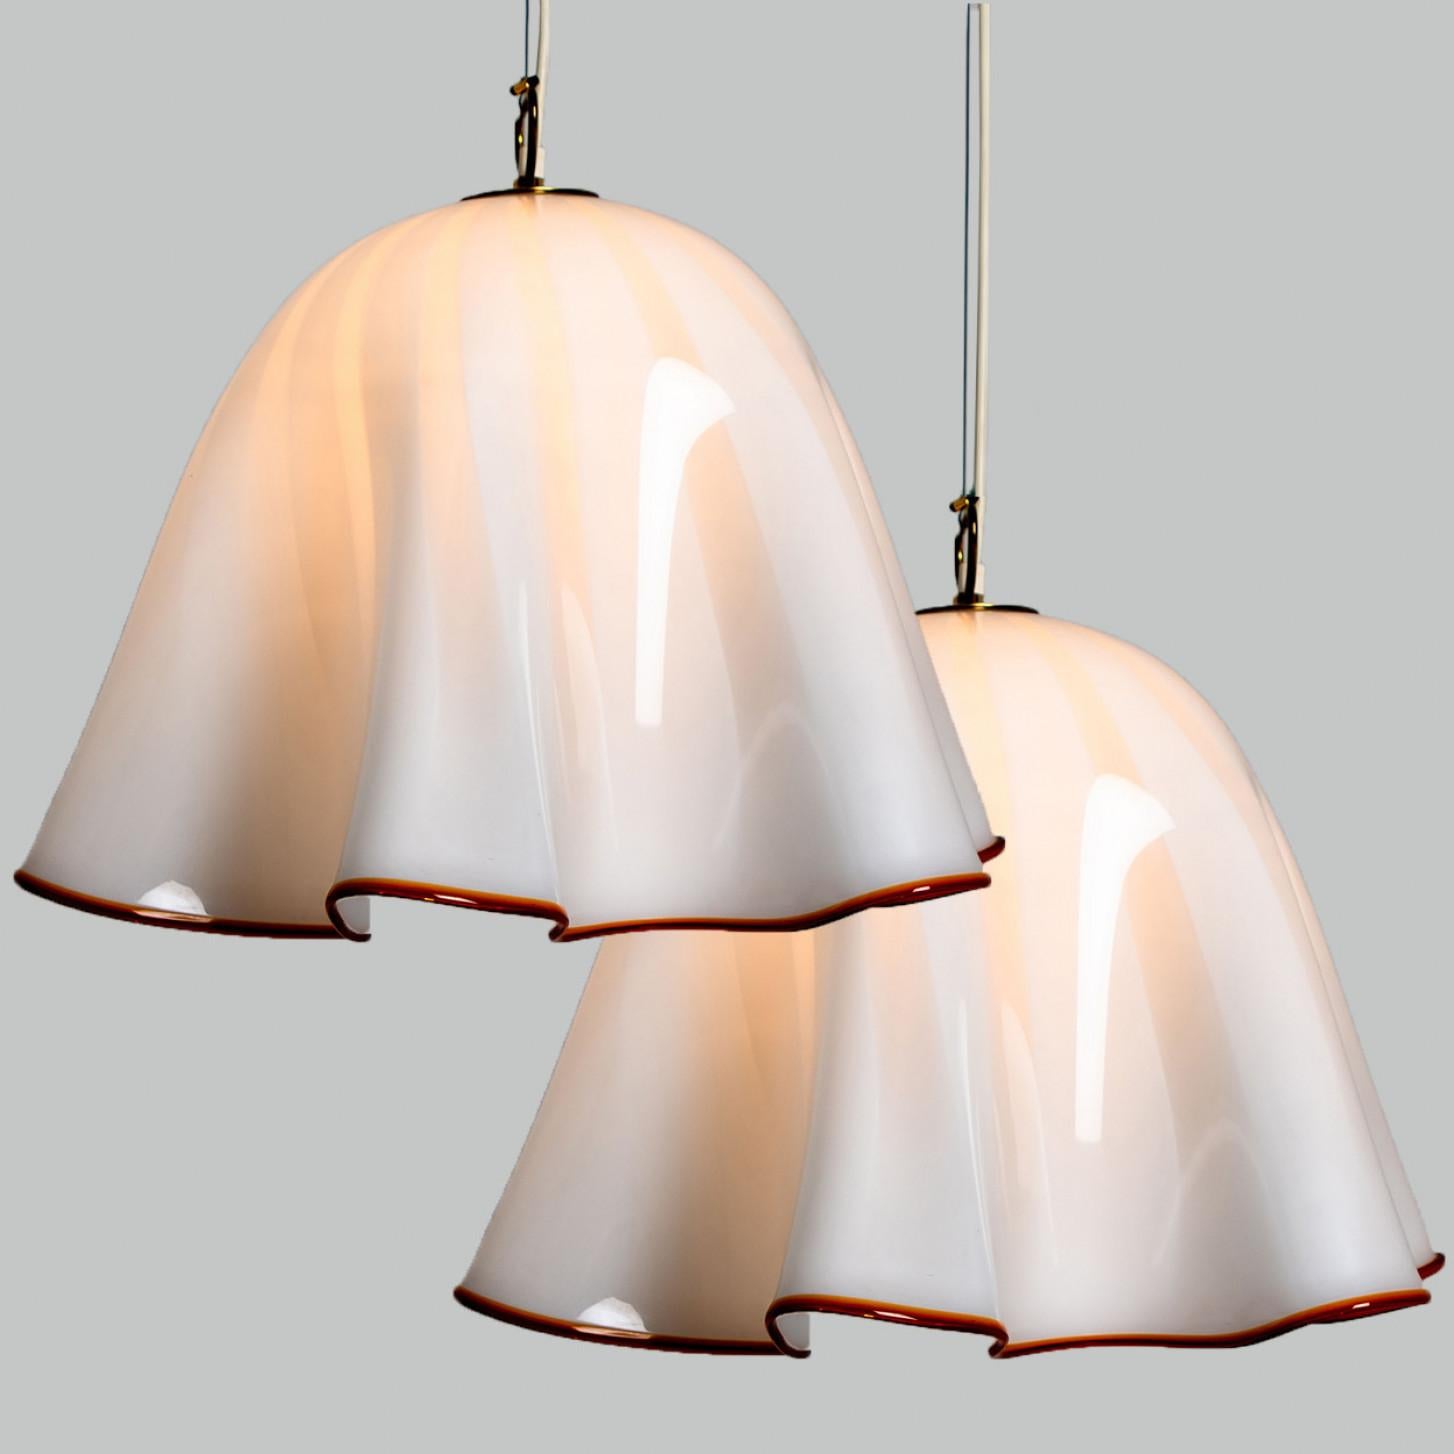 Large beautiful pendant light by J.T Kalmar. Manufactured in Austria, Europe, around 1970 (late 1960s, early 1970s). The Italian murano glass is hand blown.


The white opaque glass shows a red border. The lamps is in the style of 'Fazzoletto' glass